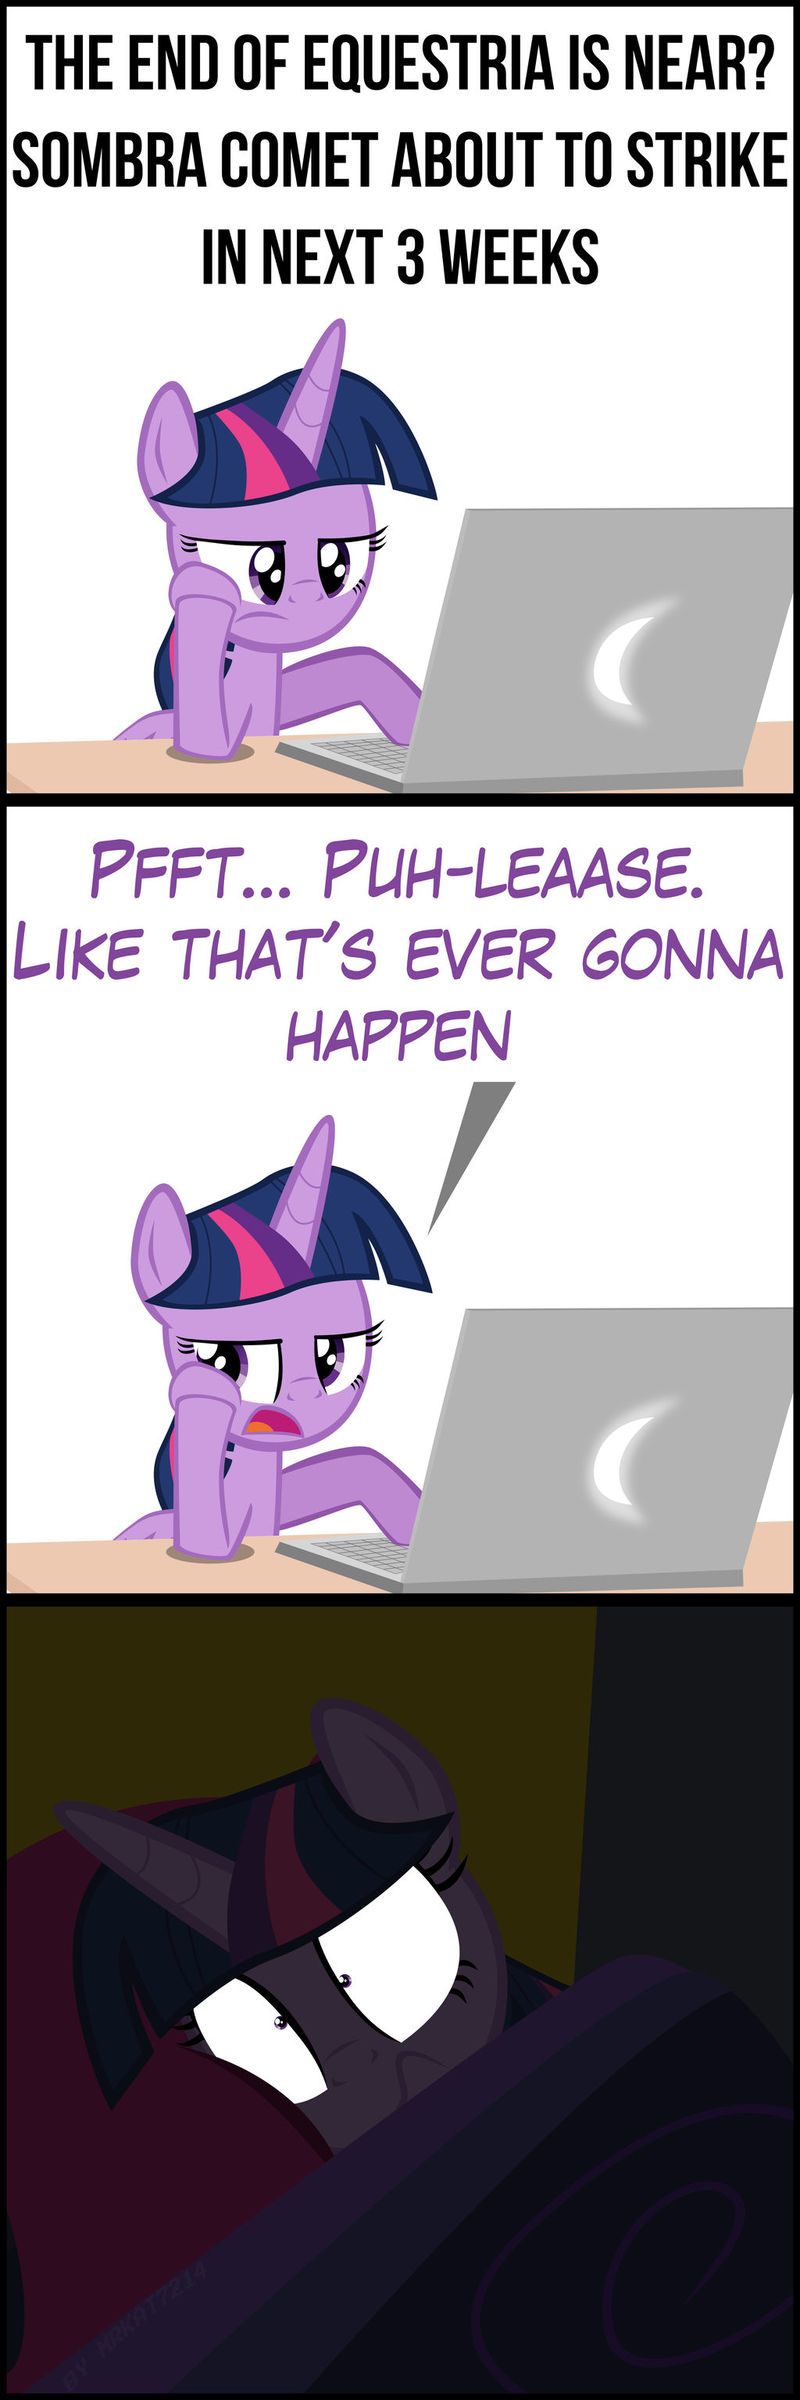 Comic 7 - The End of Equestria